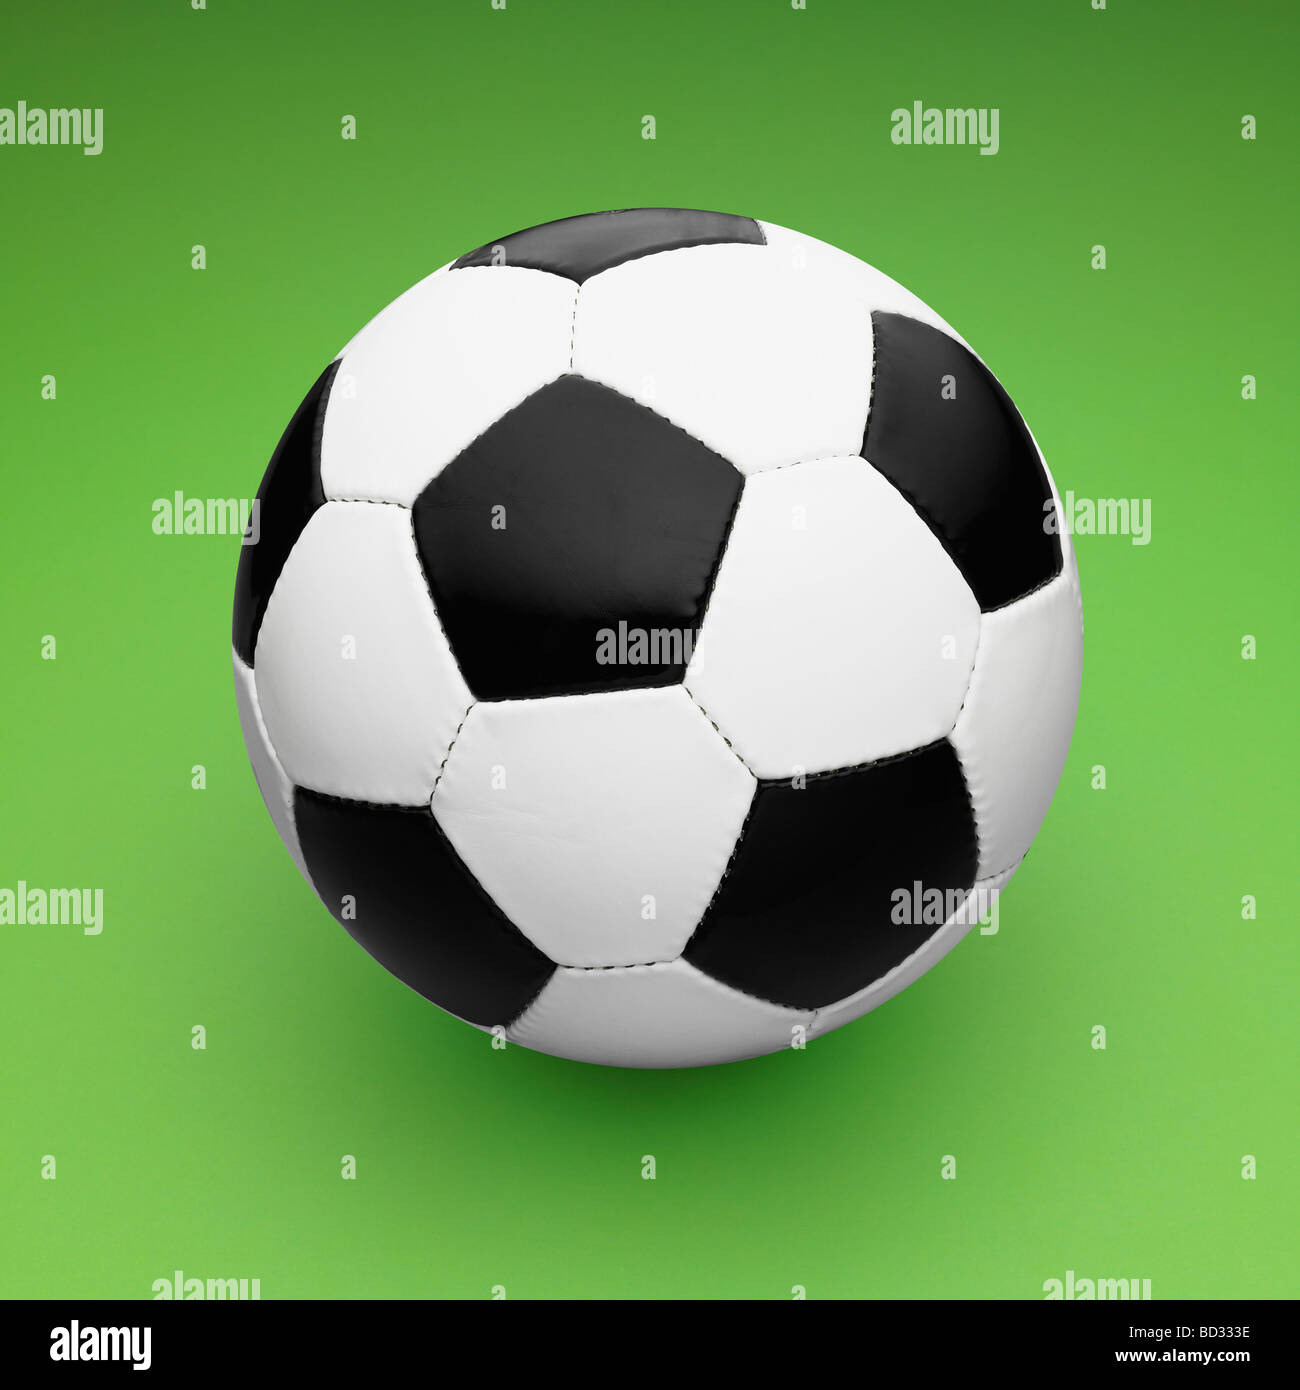 Black and White  Leather Football / Soccer Ball on Green Background. Stock Photo